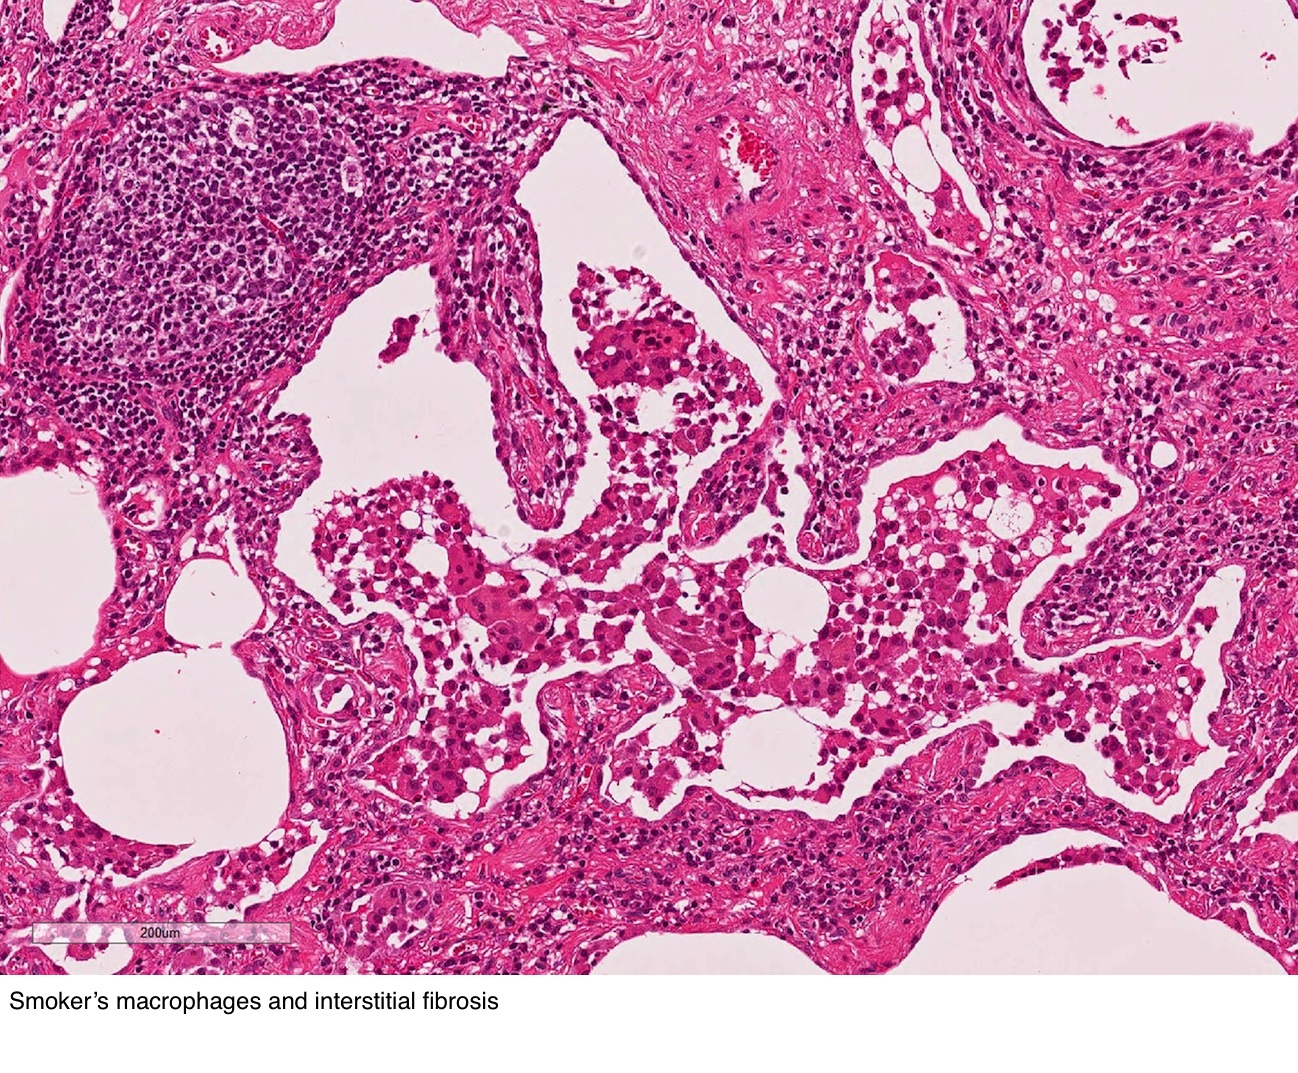 Smoker's macrophages and interstitial fibrosis